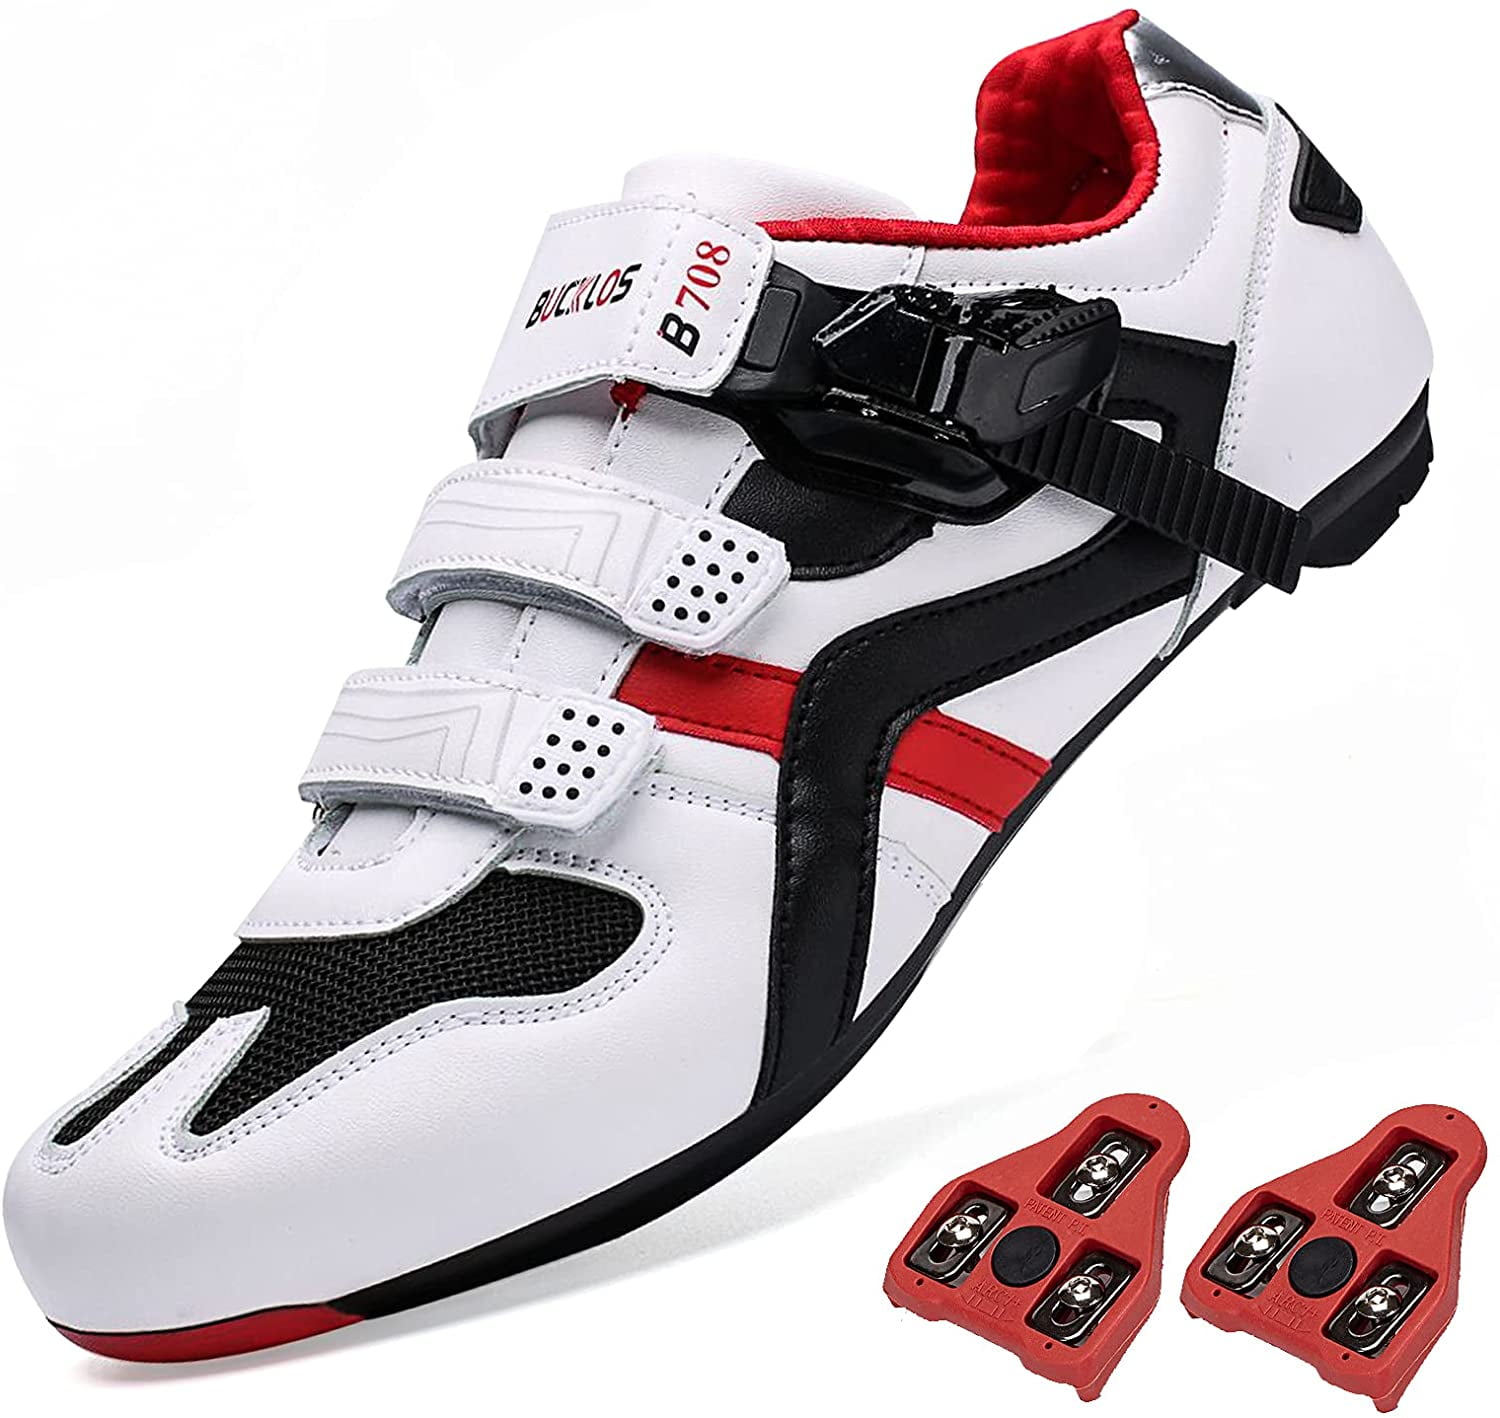 Professional Men Cycling Shoes Spd-SL Cleats Road Bike Athletic Sneakers Peloton 